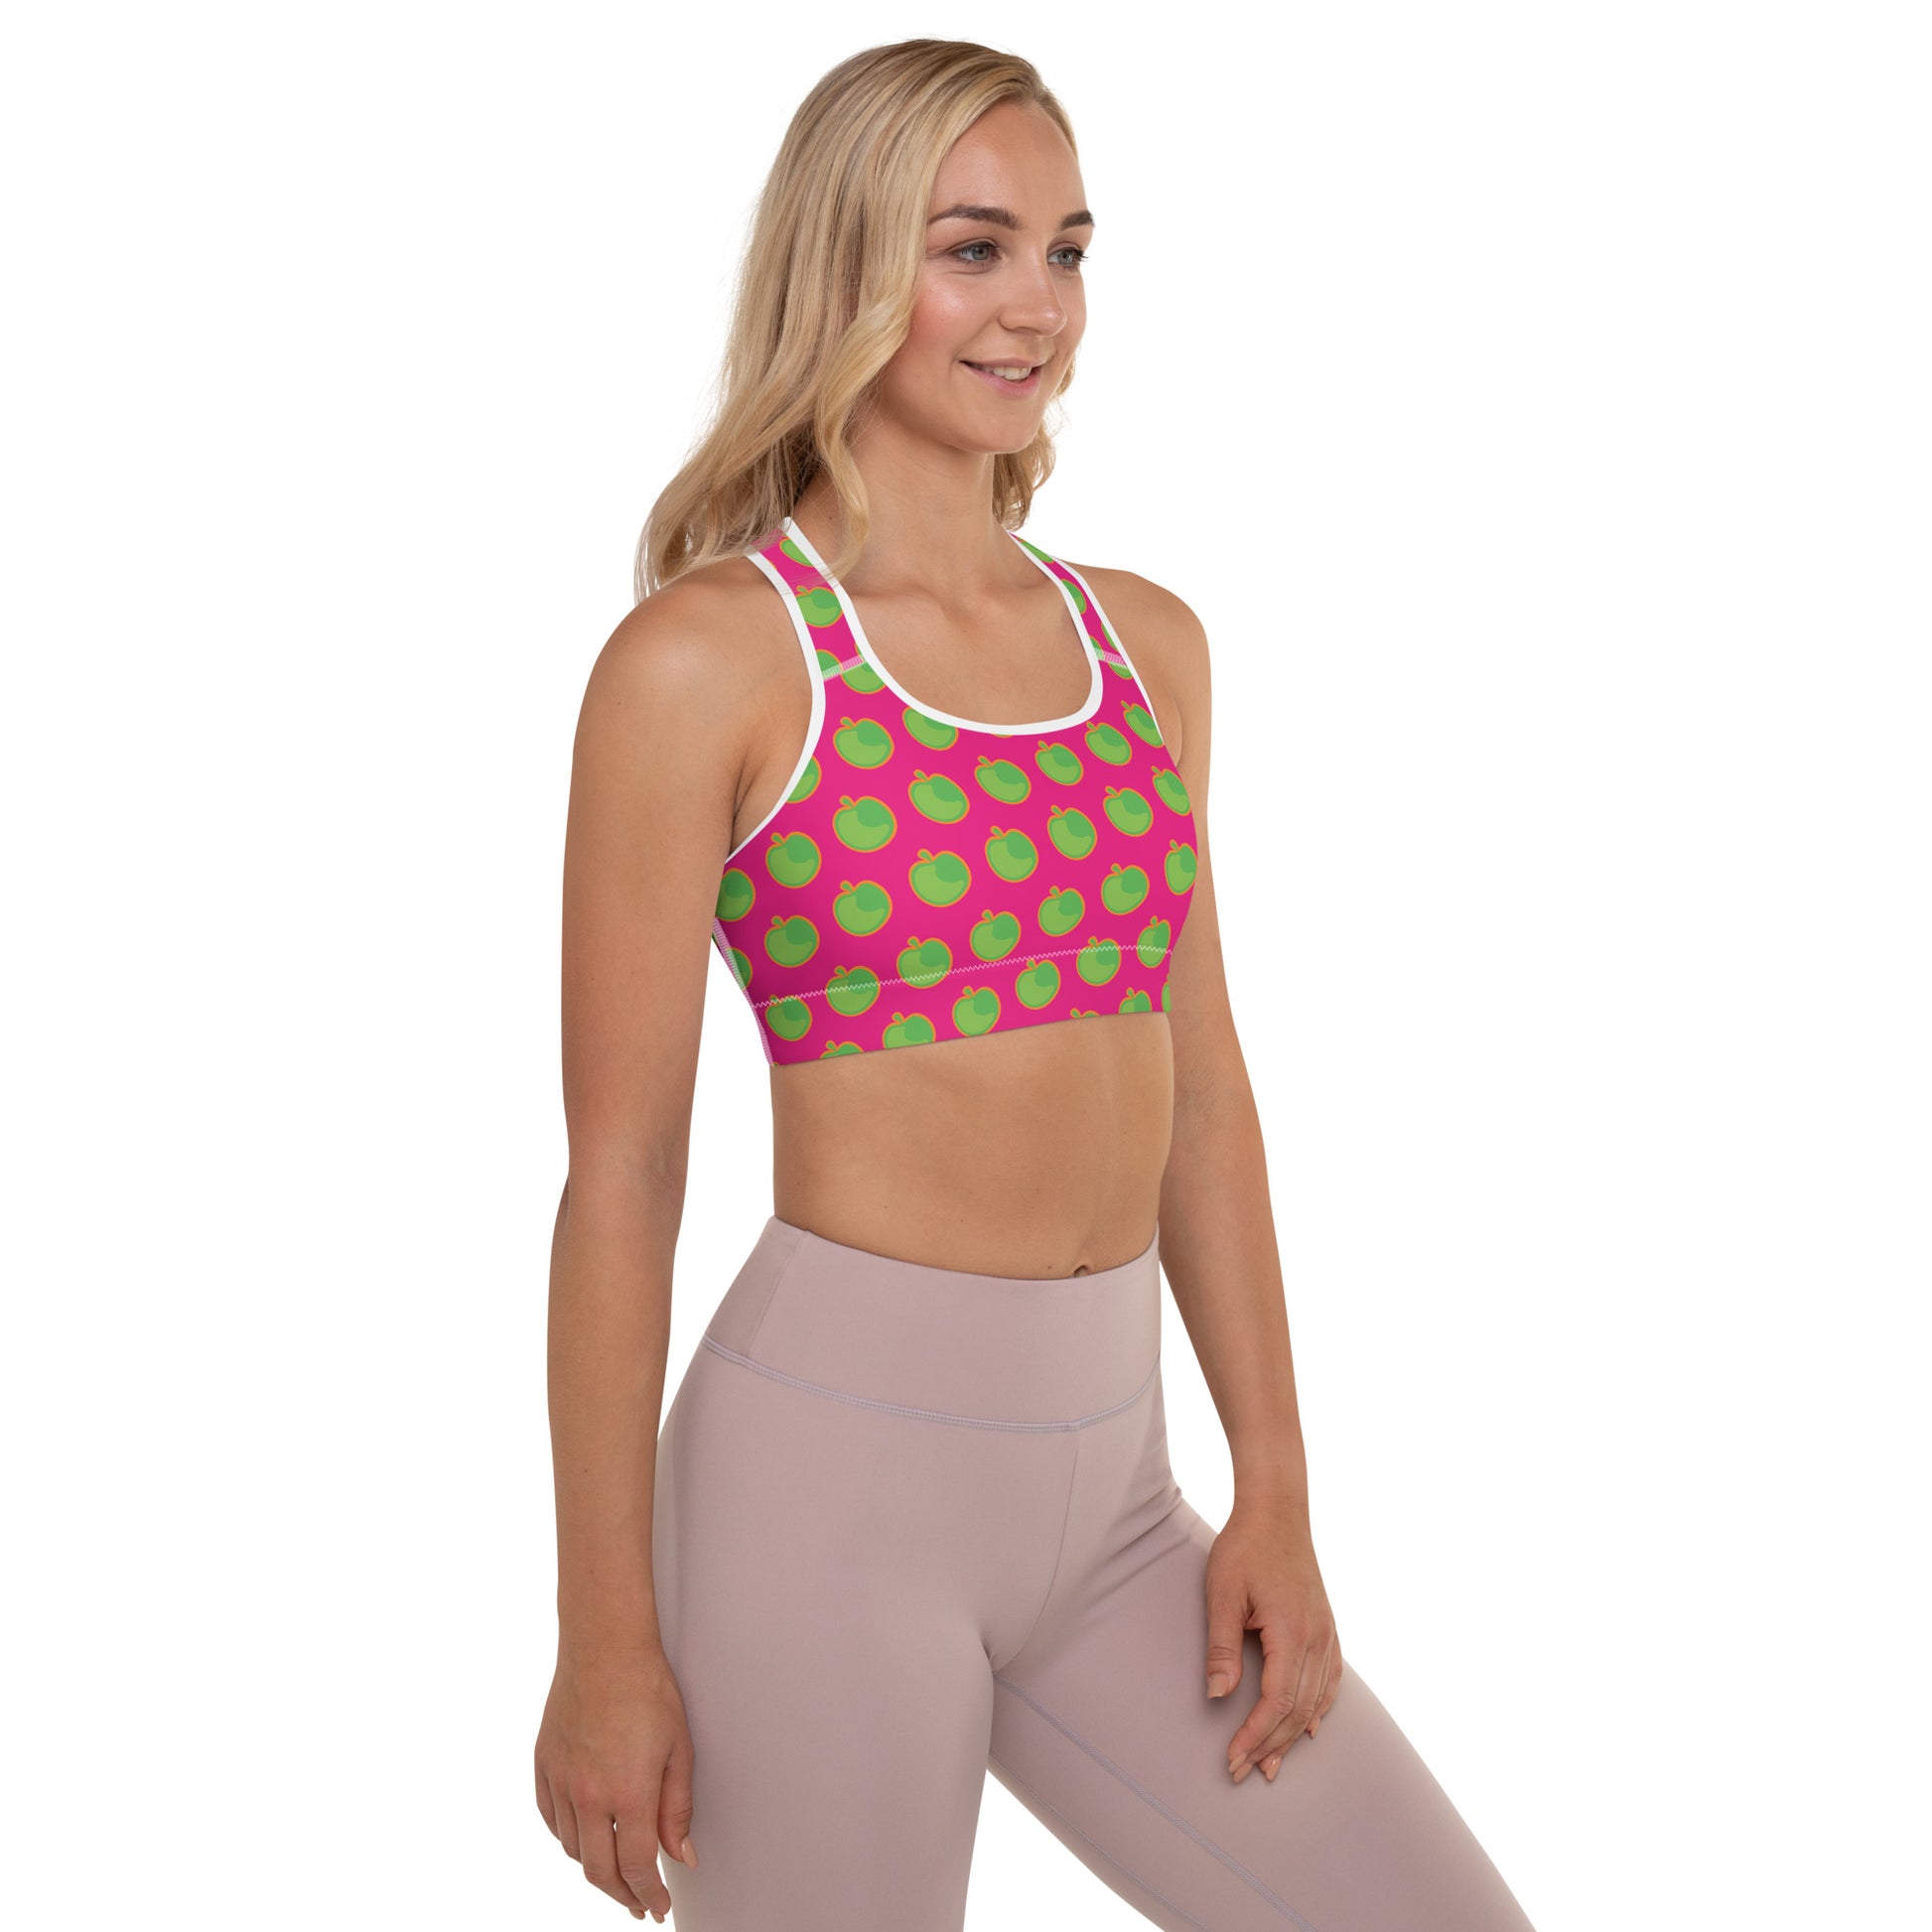 Sports Bra with meme: This apple falls really far from the tree